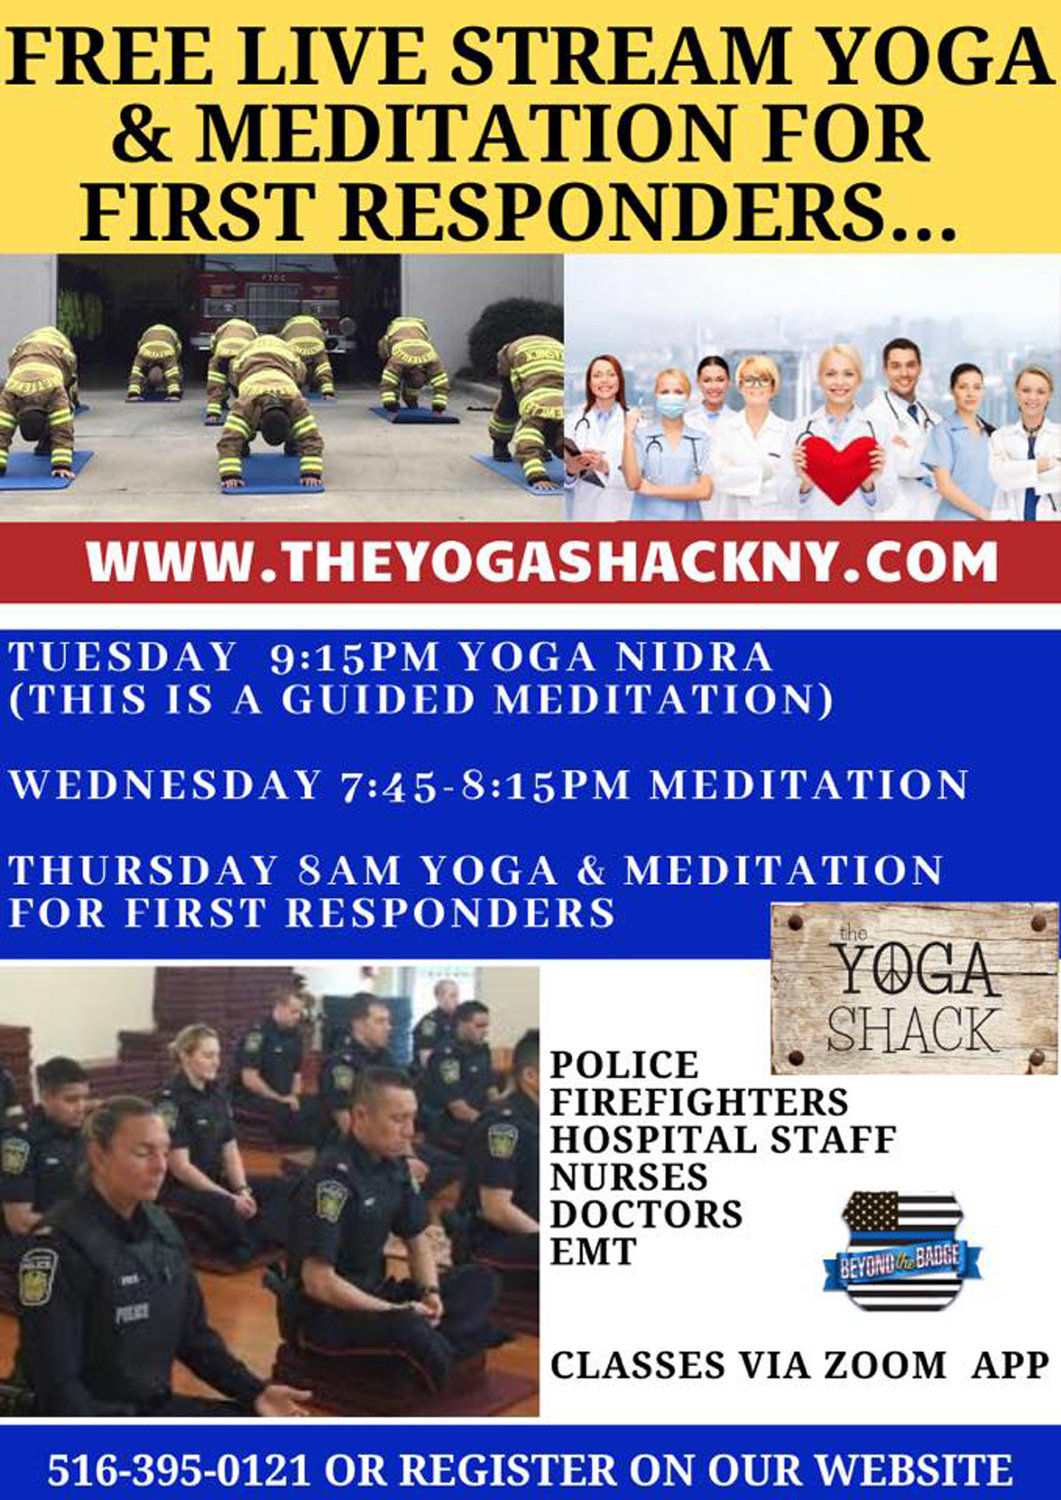 An official flyer for one of Beyond the Badge’s free yoga class offers.